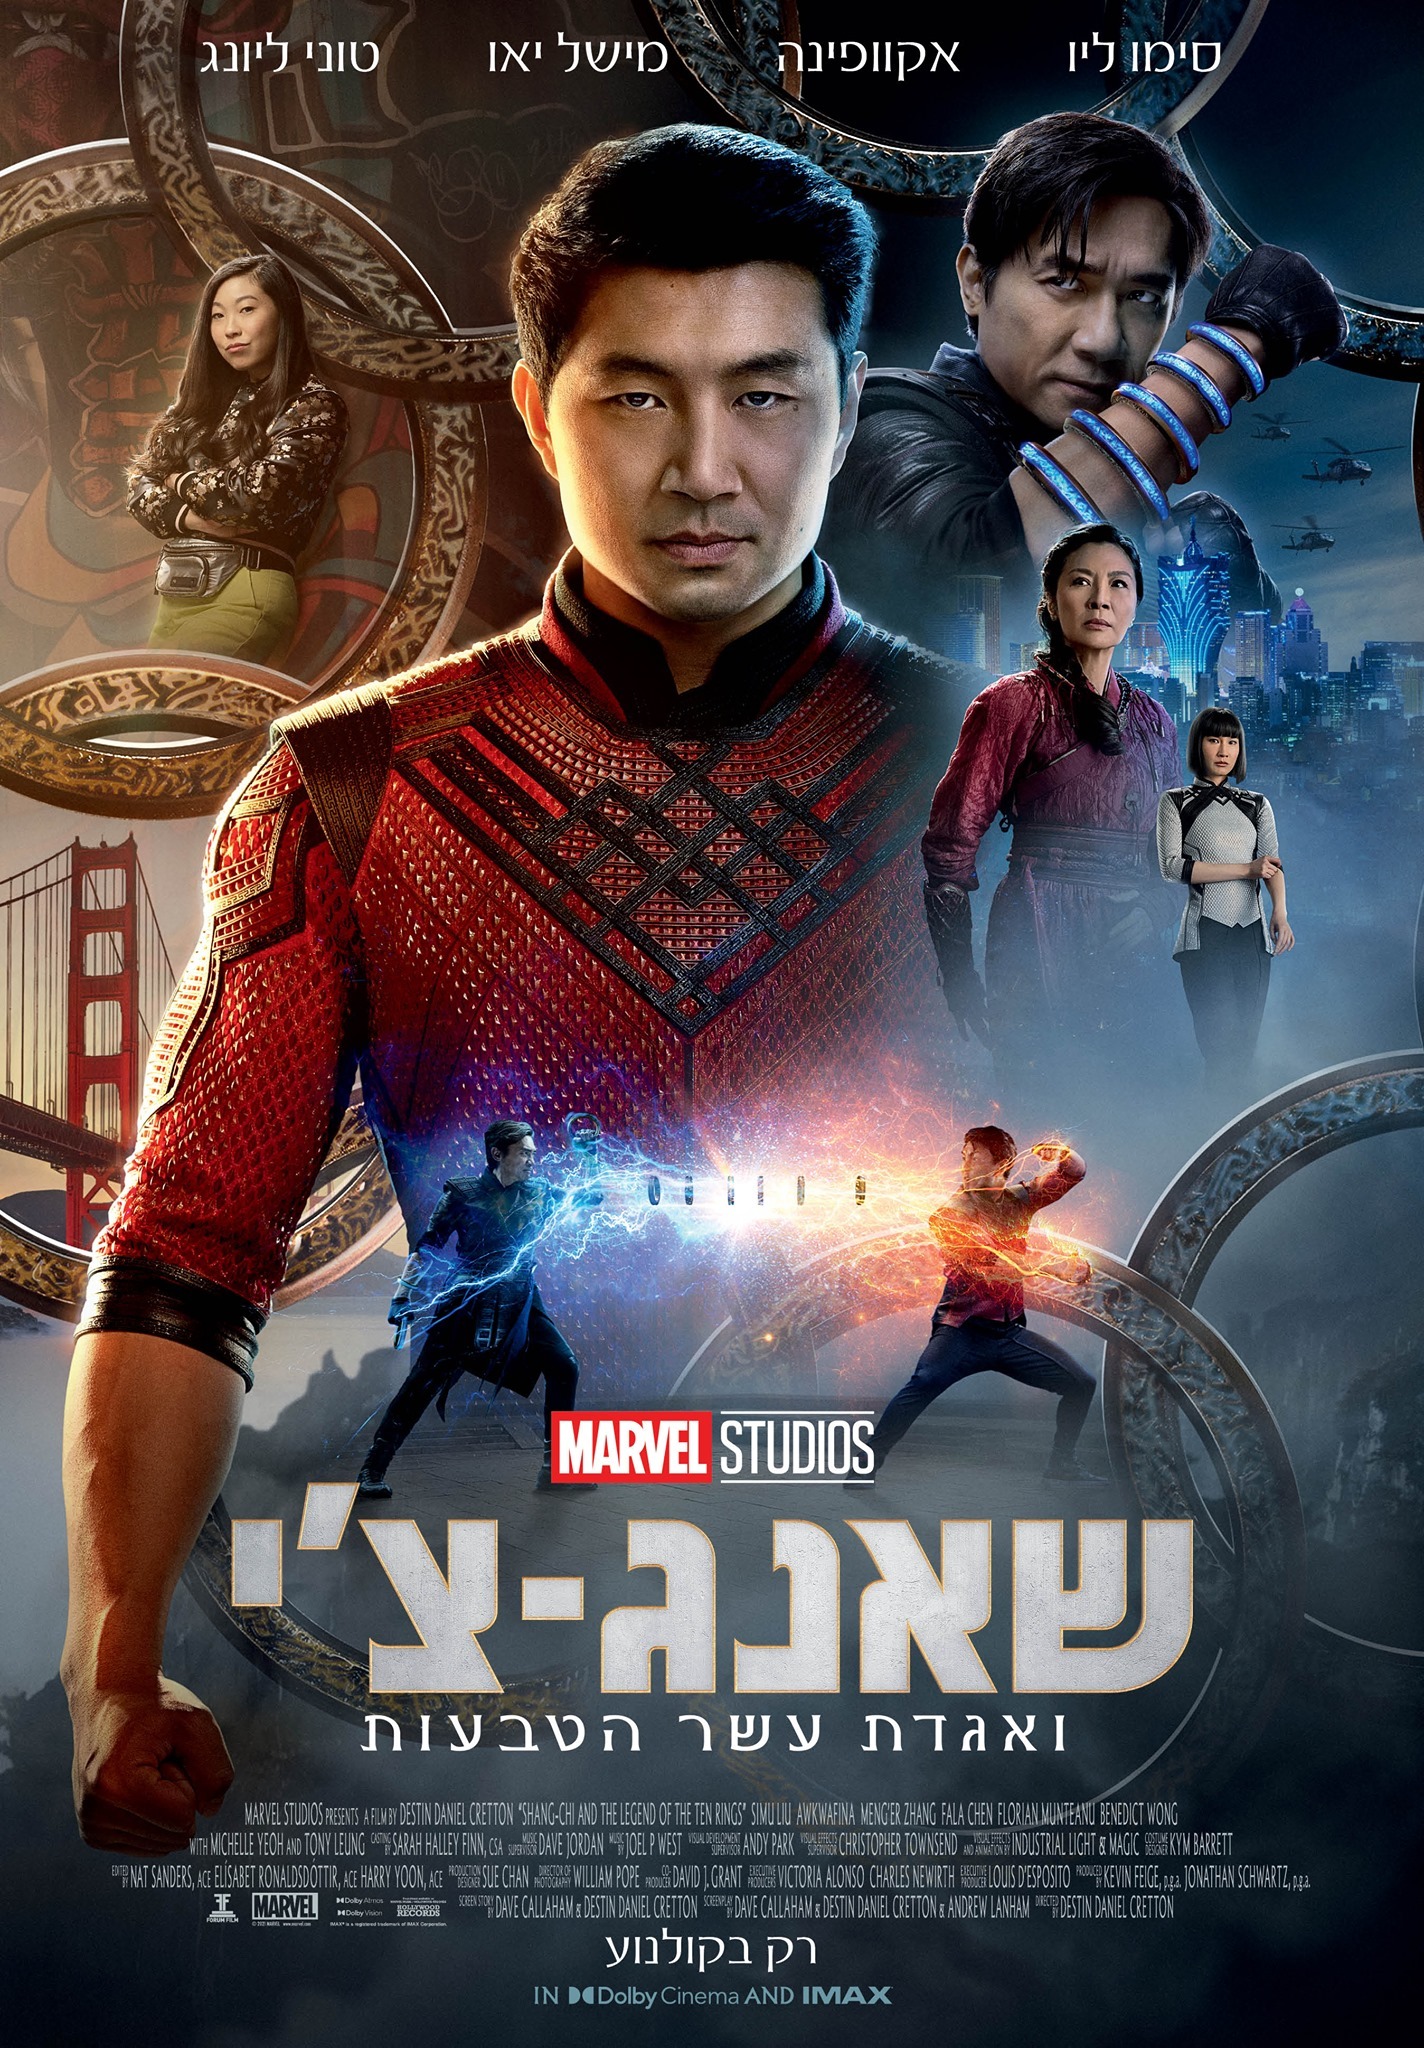 Mega Sized Movie Poster Image for Shang-Chi and the Legend of the Ten Rings (#15 of 20)